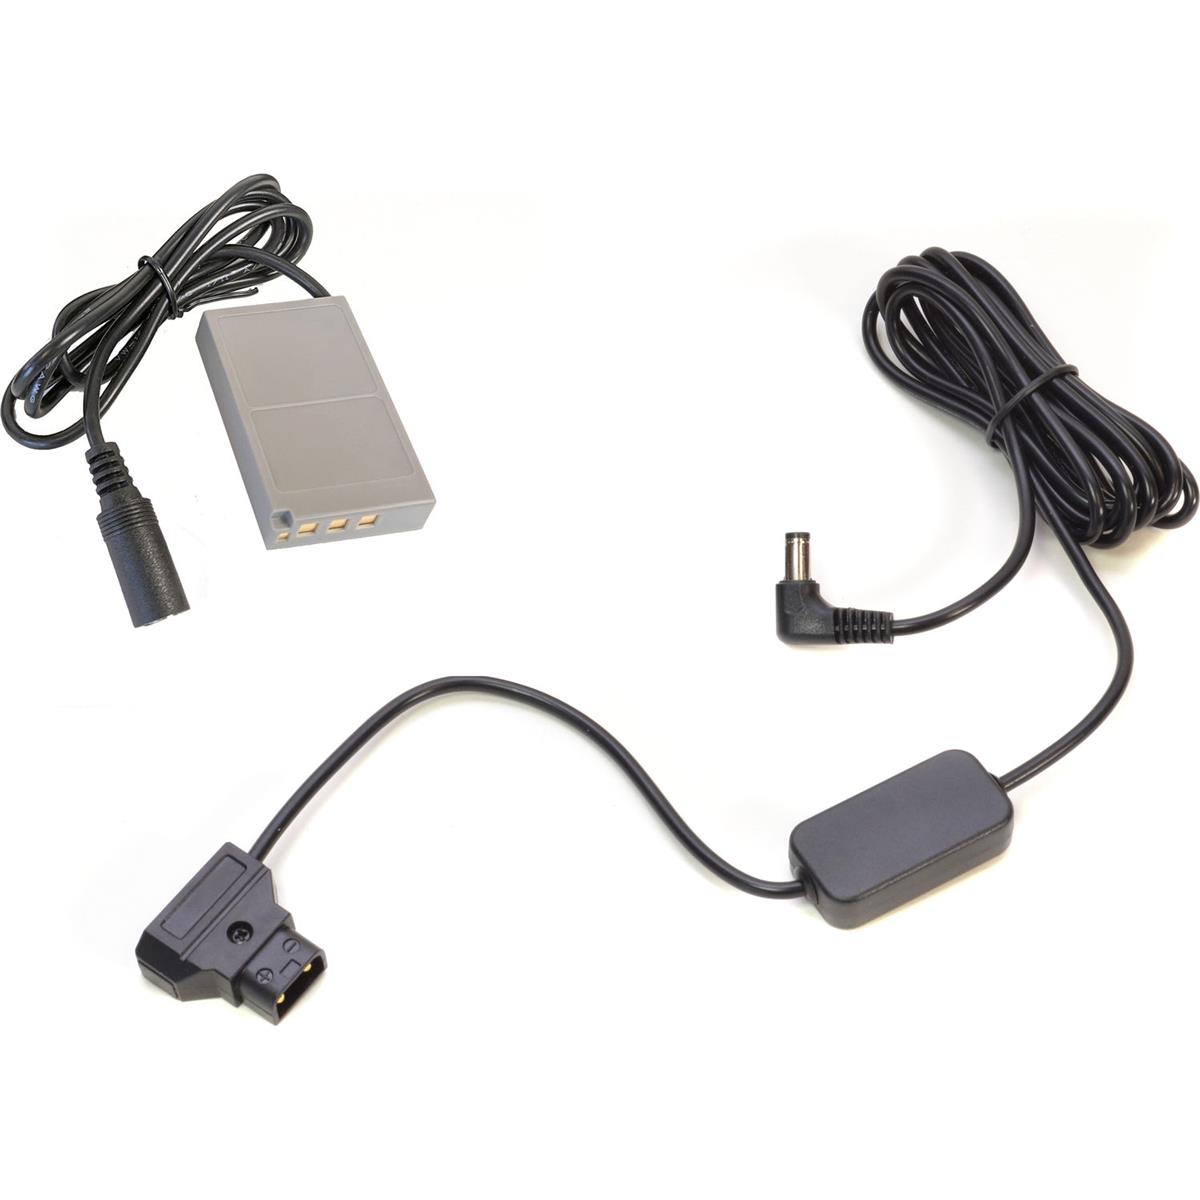 Image of Bescor BLS-50 Coupler/Dummy Battery and D-Tap Adapter Kit for Olympus Cameras